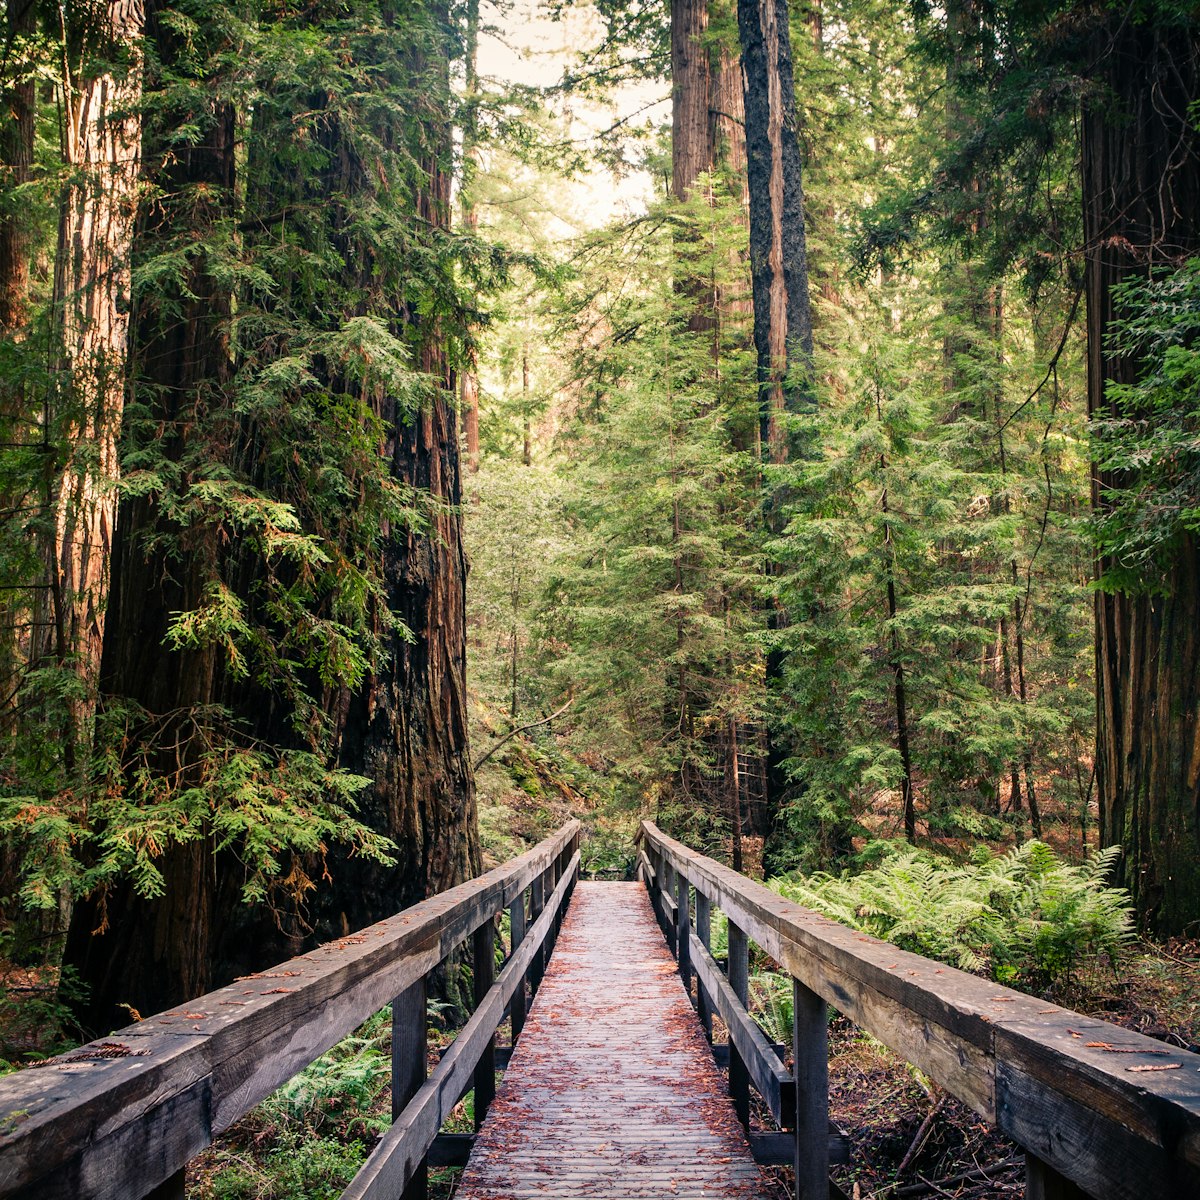 A trail bridge atop a fallen tree, among the redwood giants in the Montgomery Woods State Natural Reserve.
